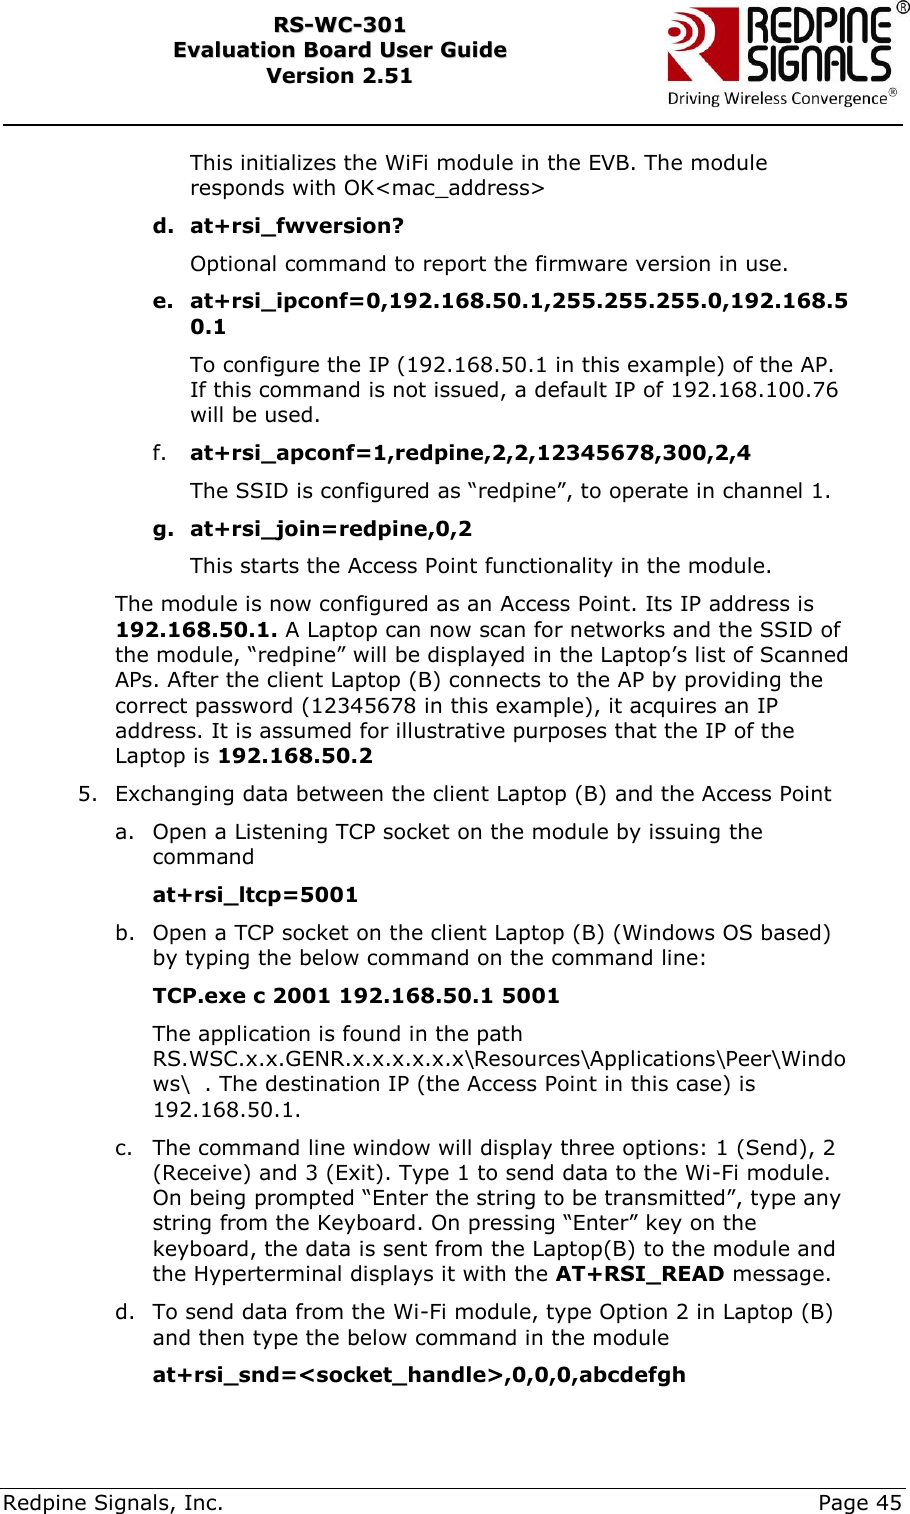     Redpine Signals, Inc.     Page 45 RRSS--WWCC--330011    EEvvaalluuaattiioonn  BBooaarrdd  UUsseerr  GGuuiiddee  VVeerrssiioonn  22..5511    This initializes the WiFi module in the EVB. The module responds with OK&lt;mac_address&gt; d. at+rsi_fwversion? Optional command to report the firmware version in use. e. at+rsi_ipconf=0,192.168.50.1,255.255.255.0,192.168.50.1 To configure the IP (192.168.50.1 in this example) of the AP. If this command is not issued, a default IP of 192.168.100.76 will be used. f. at+rsi_apconf=1,redpine,2,2,12345678,300,2,4 The SSID is configured as “redpine”, to operate in channel 1. g. at+rsi_join=redpine,0,2 This starts the Access Point functionality in the module.  The module is now configured as an Access Point. Its IP address is 192.168.50.1. A Laptop can now scan for networks and the SSID of the module, “redpine” will be displayed in the Laptop‟s list of Scanned APs. After the client Laptop (B) connects to the AP by providing the correct password (12345678 in this example), it acquires an IP address. It is assumed for illustrative purposes that the IP of the Laptop is 192.168.50.2 5. Exchanging data between the client Laptop (B) and the Access Point a. Open a Listening TCP socket on the module by issuing the command at+rsi_ltcp=5001 b. Open a TCP socket on the client Laptop (B) (Windows OS based) by typing the below command on the command line:              TCP.exe c 2001 192.168.50.1 5001  The application is found in the path RS.WSC.x.x.GENR.x.x.x.x.x.x\Resources\Applications\Peer\Windows\  . The destination IP (the Access Point in this case) is 192.168.50.1.  c. The command line window will display three options: 1 (Send), 2 (Receive) and 3 (Exit). Type 1 to send data to the Wi-Fi module. On being prompted “Enter the string to be transmitted”, type any string from the Keyboard. On pressing “Enter” key on the keyboard, the data is sent from the Laptop(B) to the module and the Hyperterminal displays it with the AT+RSI_READ message.  d. To send data from the Wi-Fi module, type Option 2 in Laptop (B) and then type the below command in the module at+rsi_snd=&lt;socket_handle&gt;,0,0,0,abcdefgh 